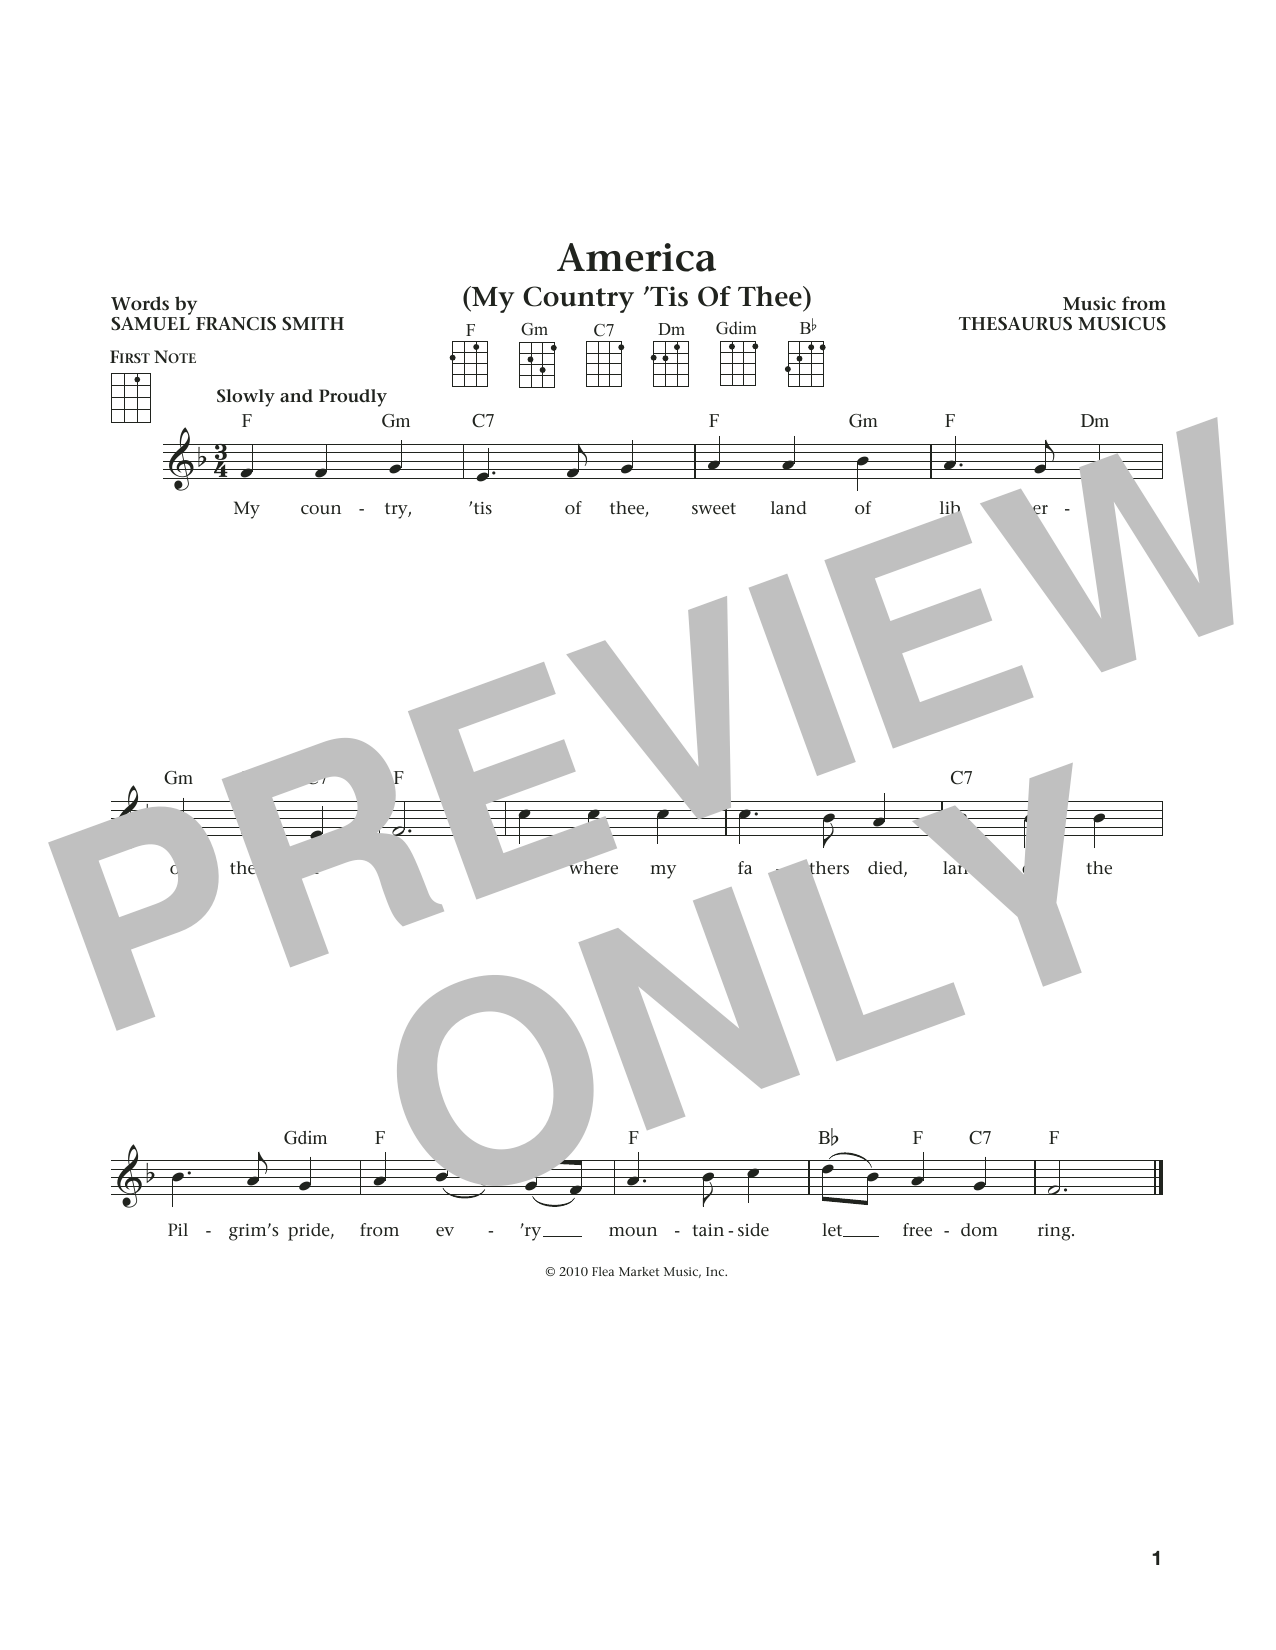 Download Thesaurus Musicus My Country, 'Tis Of Thee (America) (fro Sheet Music